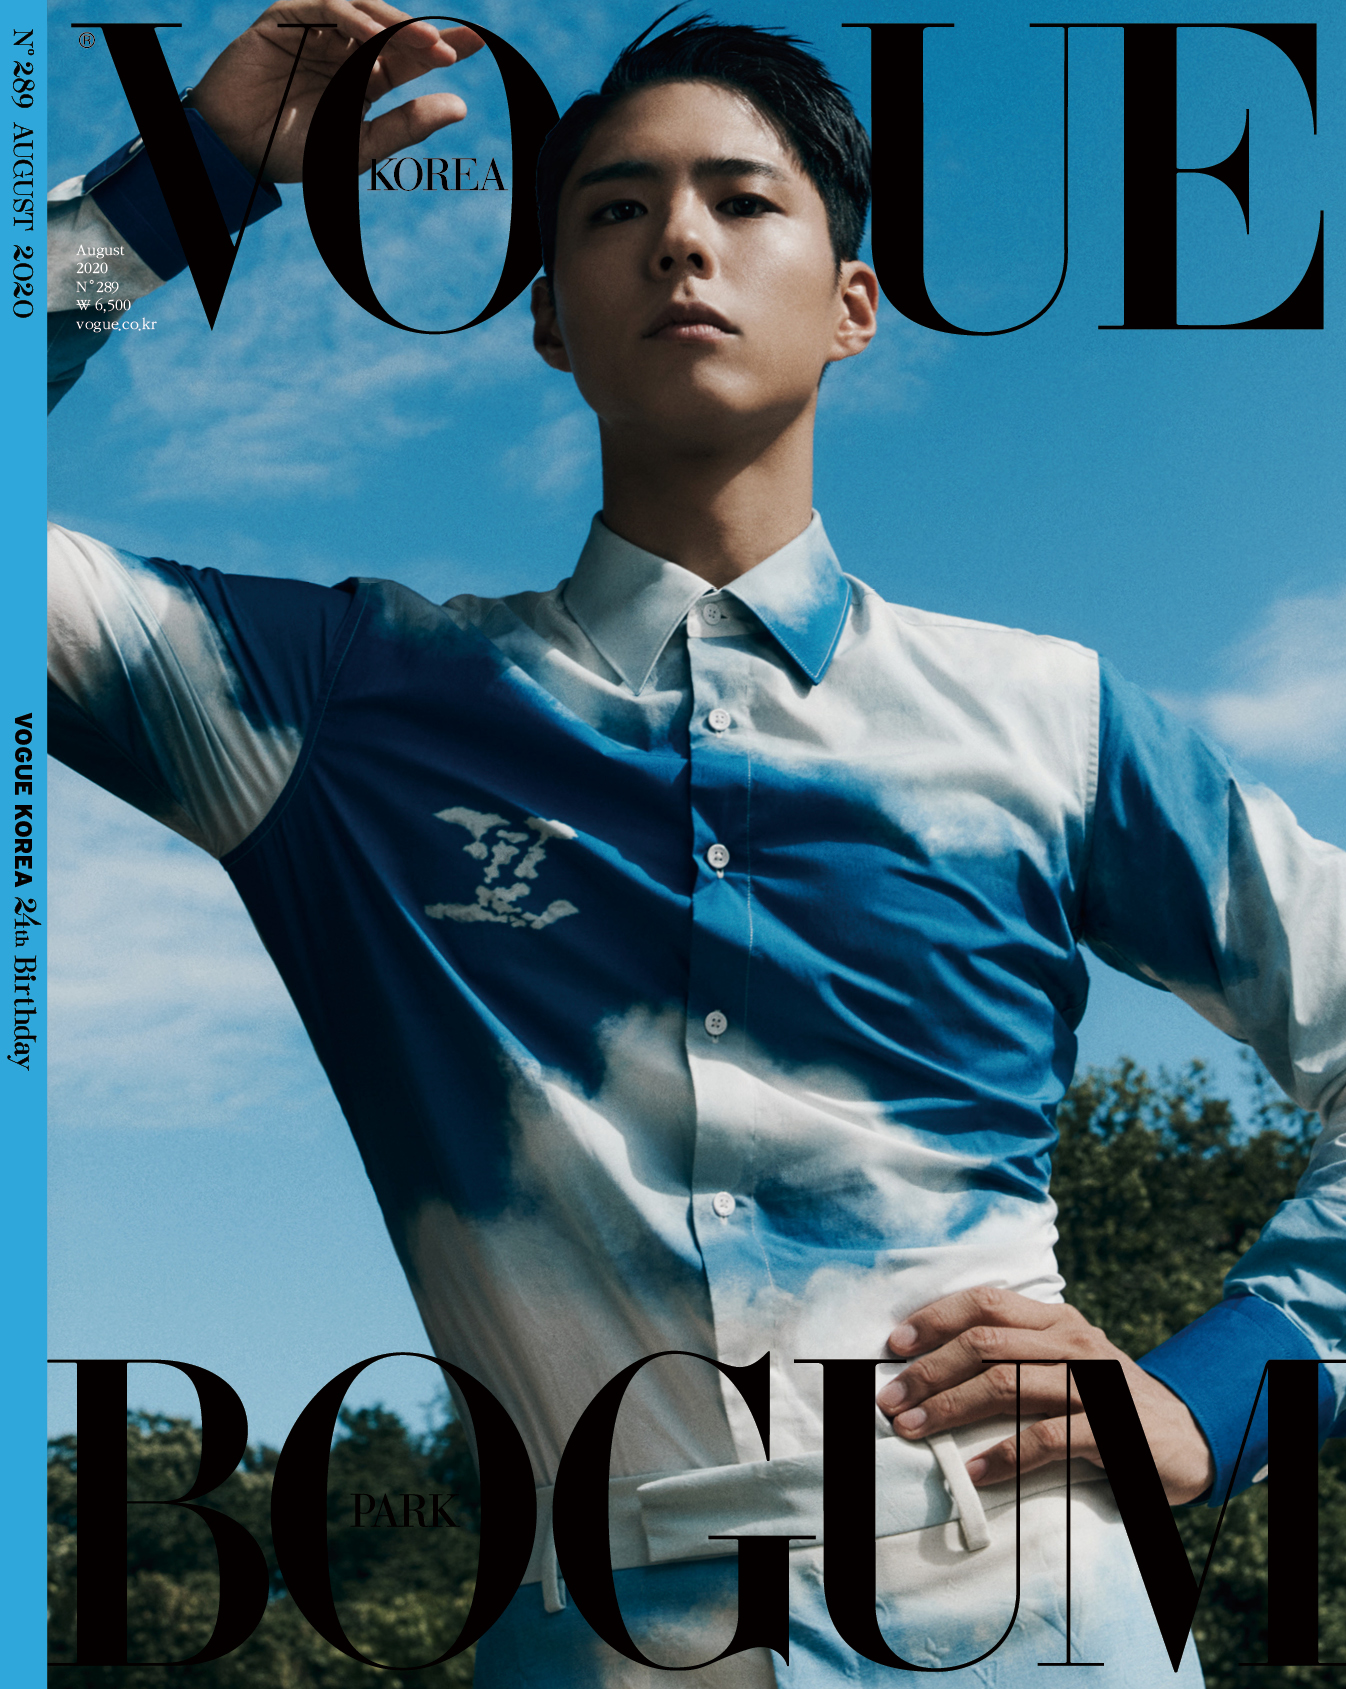 maekyung.com news teamActor Park Bo-gum has announced the current situation with a picture.On the 15th, fashion magazine Vogue Korea released a cover picture of the 24th anniversary issue with Park Bo-gum.This film, which was held at Changdeokgung, created an emotional visual that seemed to see a movie on the other hand, combining the premiere beauty of the palace and the restrained masculine beauty of Actor Park Bo-gum.In addition, through Interview, there will be genuine stories about the thoughts and values ​​of twenty-eight Park Bo-gum.According to the official, Park Bo-gum Actors proposal to promote the beauty of Korea has made me shoot at Changdeokgung. Park Bo-gum is a warm and caring inner owner, but he is more cool professional than anyone else in his work. The picture and interview of Vogue Korea was published in Korea, Taiwan, Thailand, Hong Kong edition Vogue and Chinese edition Vogue ME, and proved the power of Park Bo-gum, which captivated Asia.The August issue of Vogue Korea, which includes the picture and interview of Park Bo-gum Actor, will be published on the 20th.